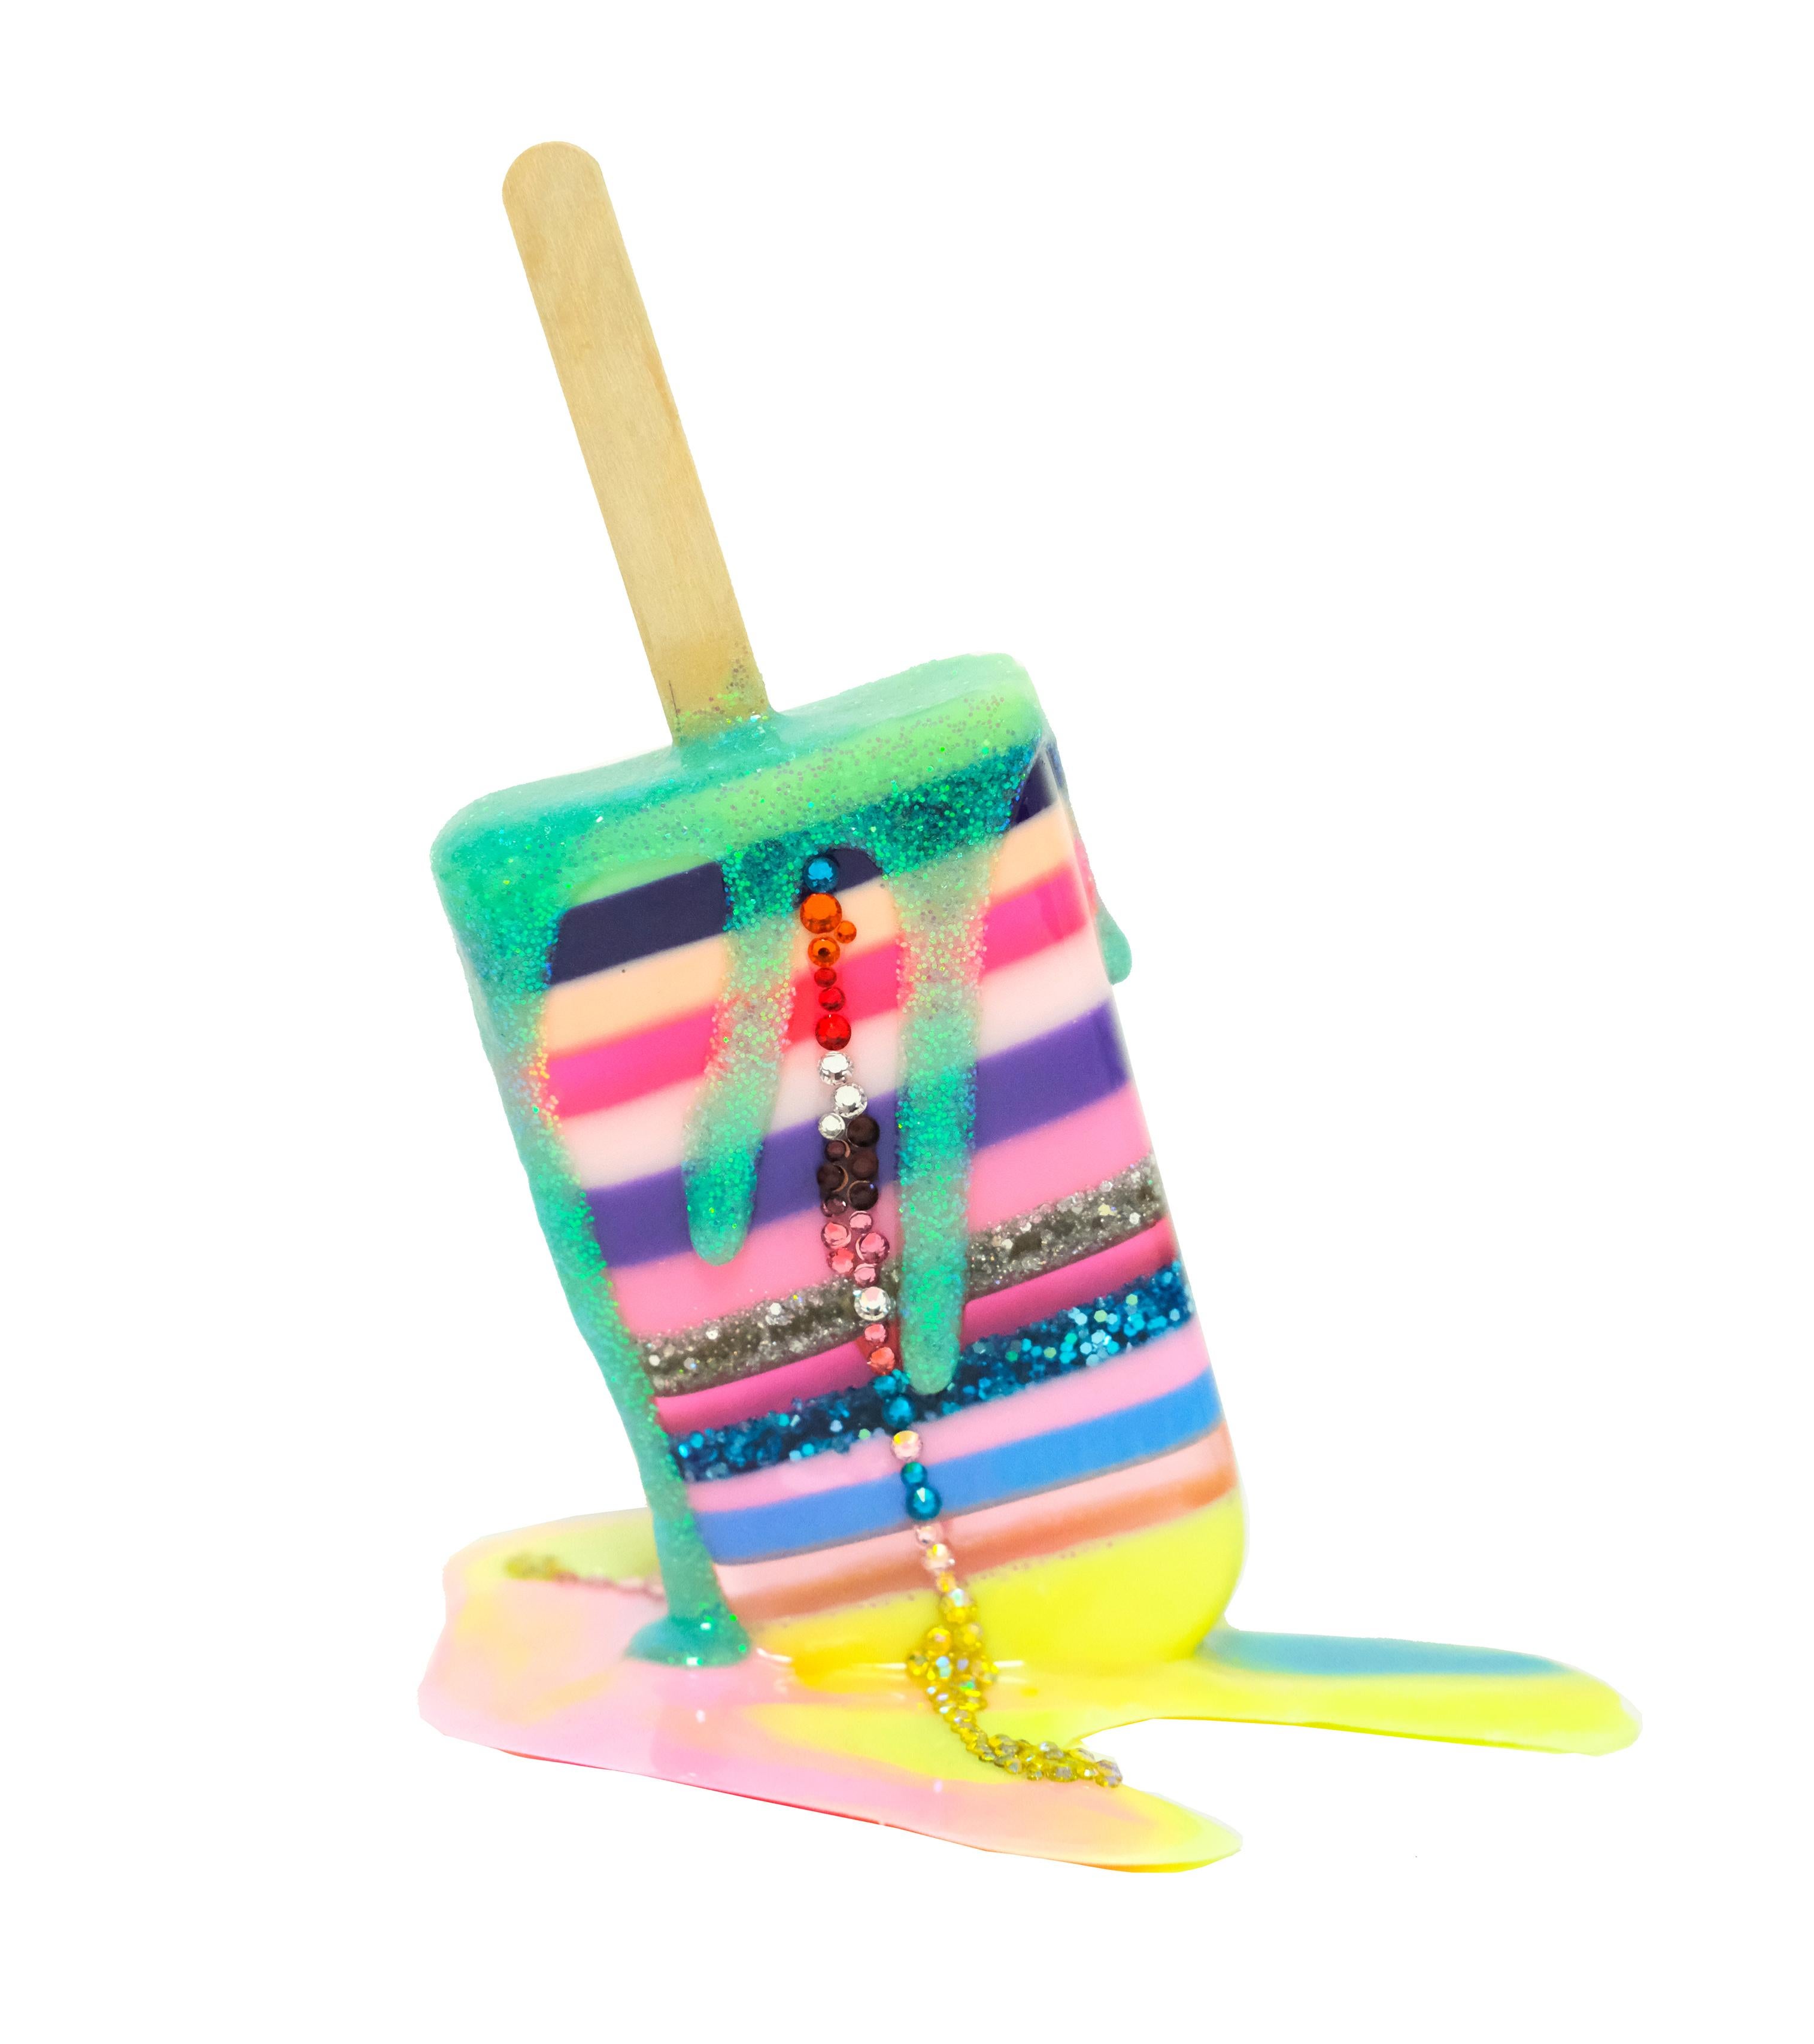 "90s Beach Party" -  Resin Popsicle Sculpture